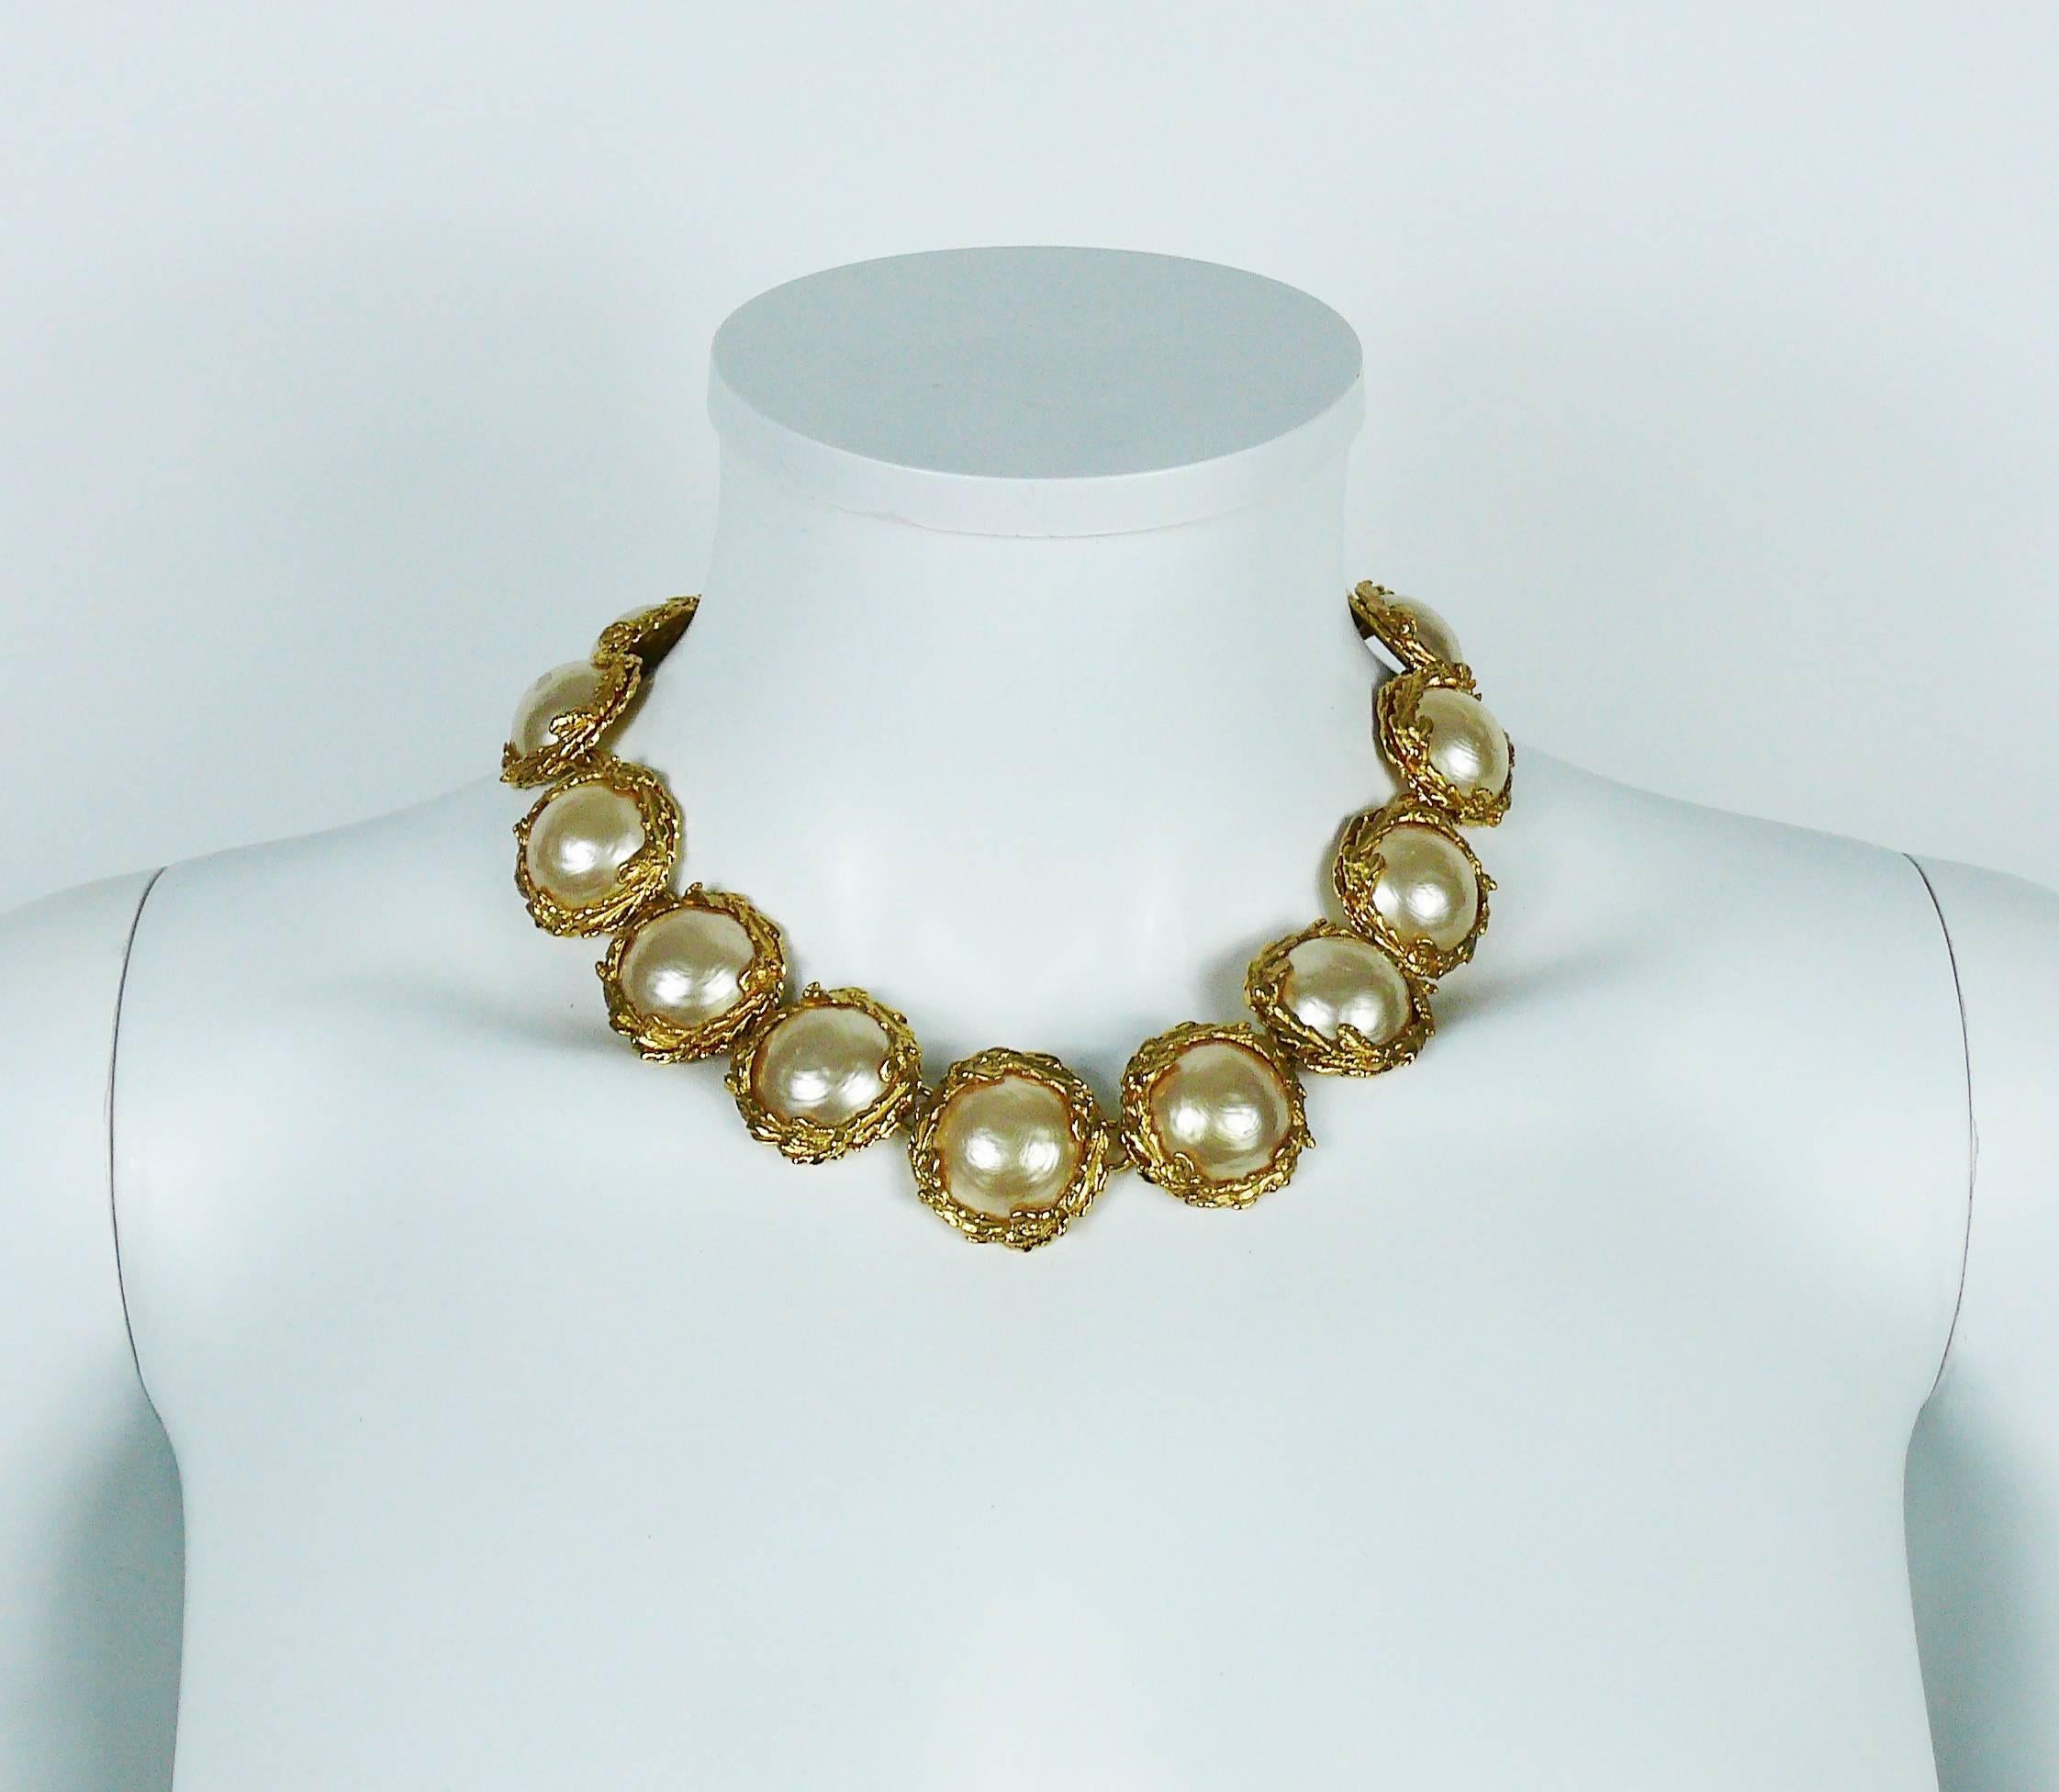 YVES SAINT LAURENT vintage necklace and earrings (clip-on) set embellished with large irregular half faux pearls in a gold toned foliage setting.

NECKLACE
Marked Marked YVES SAINT LAURENT Made in France.
Indicative measurements : max. length